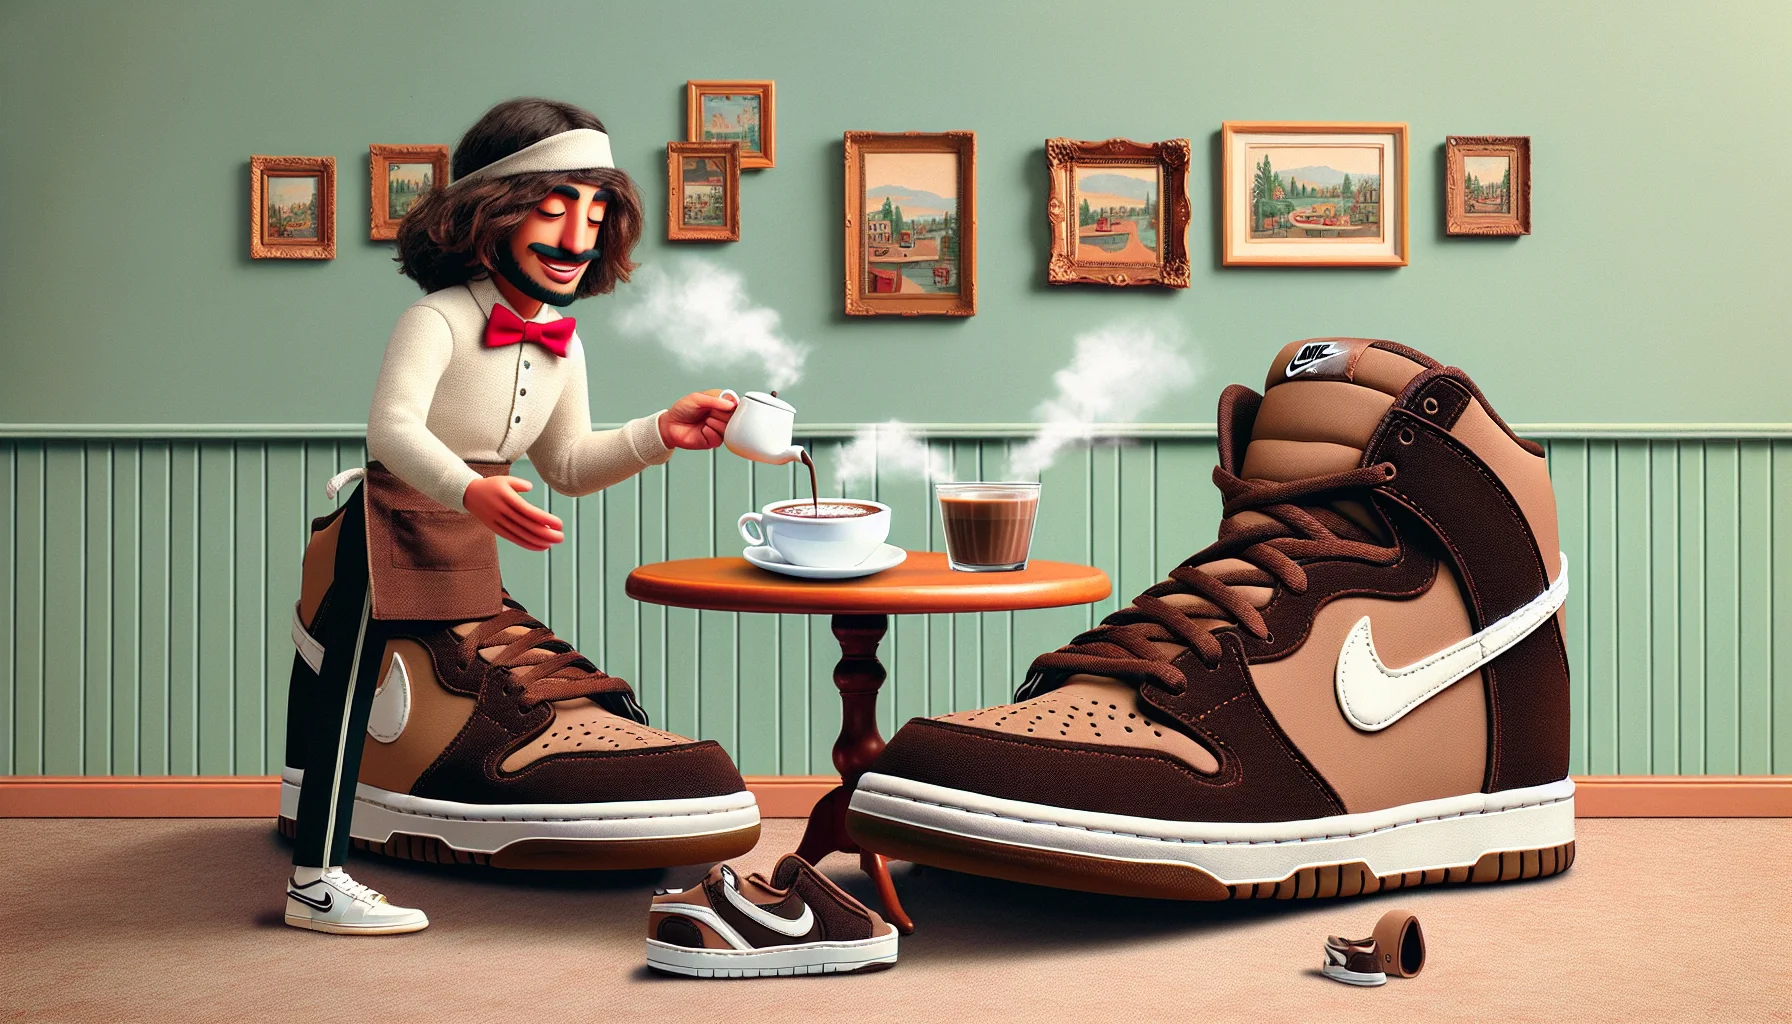 Create a detailed and humorous image featuring a pair of dunk low Mocha-colored shoes. Picture them in an appealing scenario designed to make people smile and relax. For instance, set them in a lighthearted cafe scene, complete with a quirky barista of Caucasian descent, serving steaming cup of mocha to the shoes seated at a tiny table for two, all set against a cozy, vintage styled backdrop. Add a playful touch by having little animated steams rising from the shoes implying they're 'hot'. This should exude an enticing and enjoyable vibe.